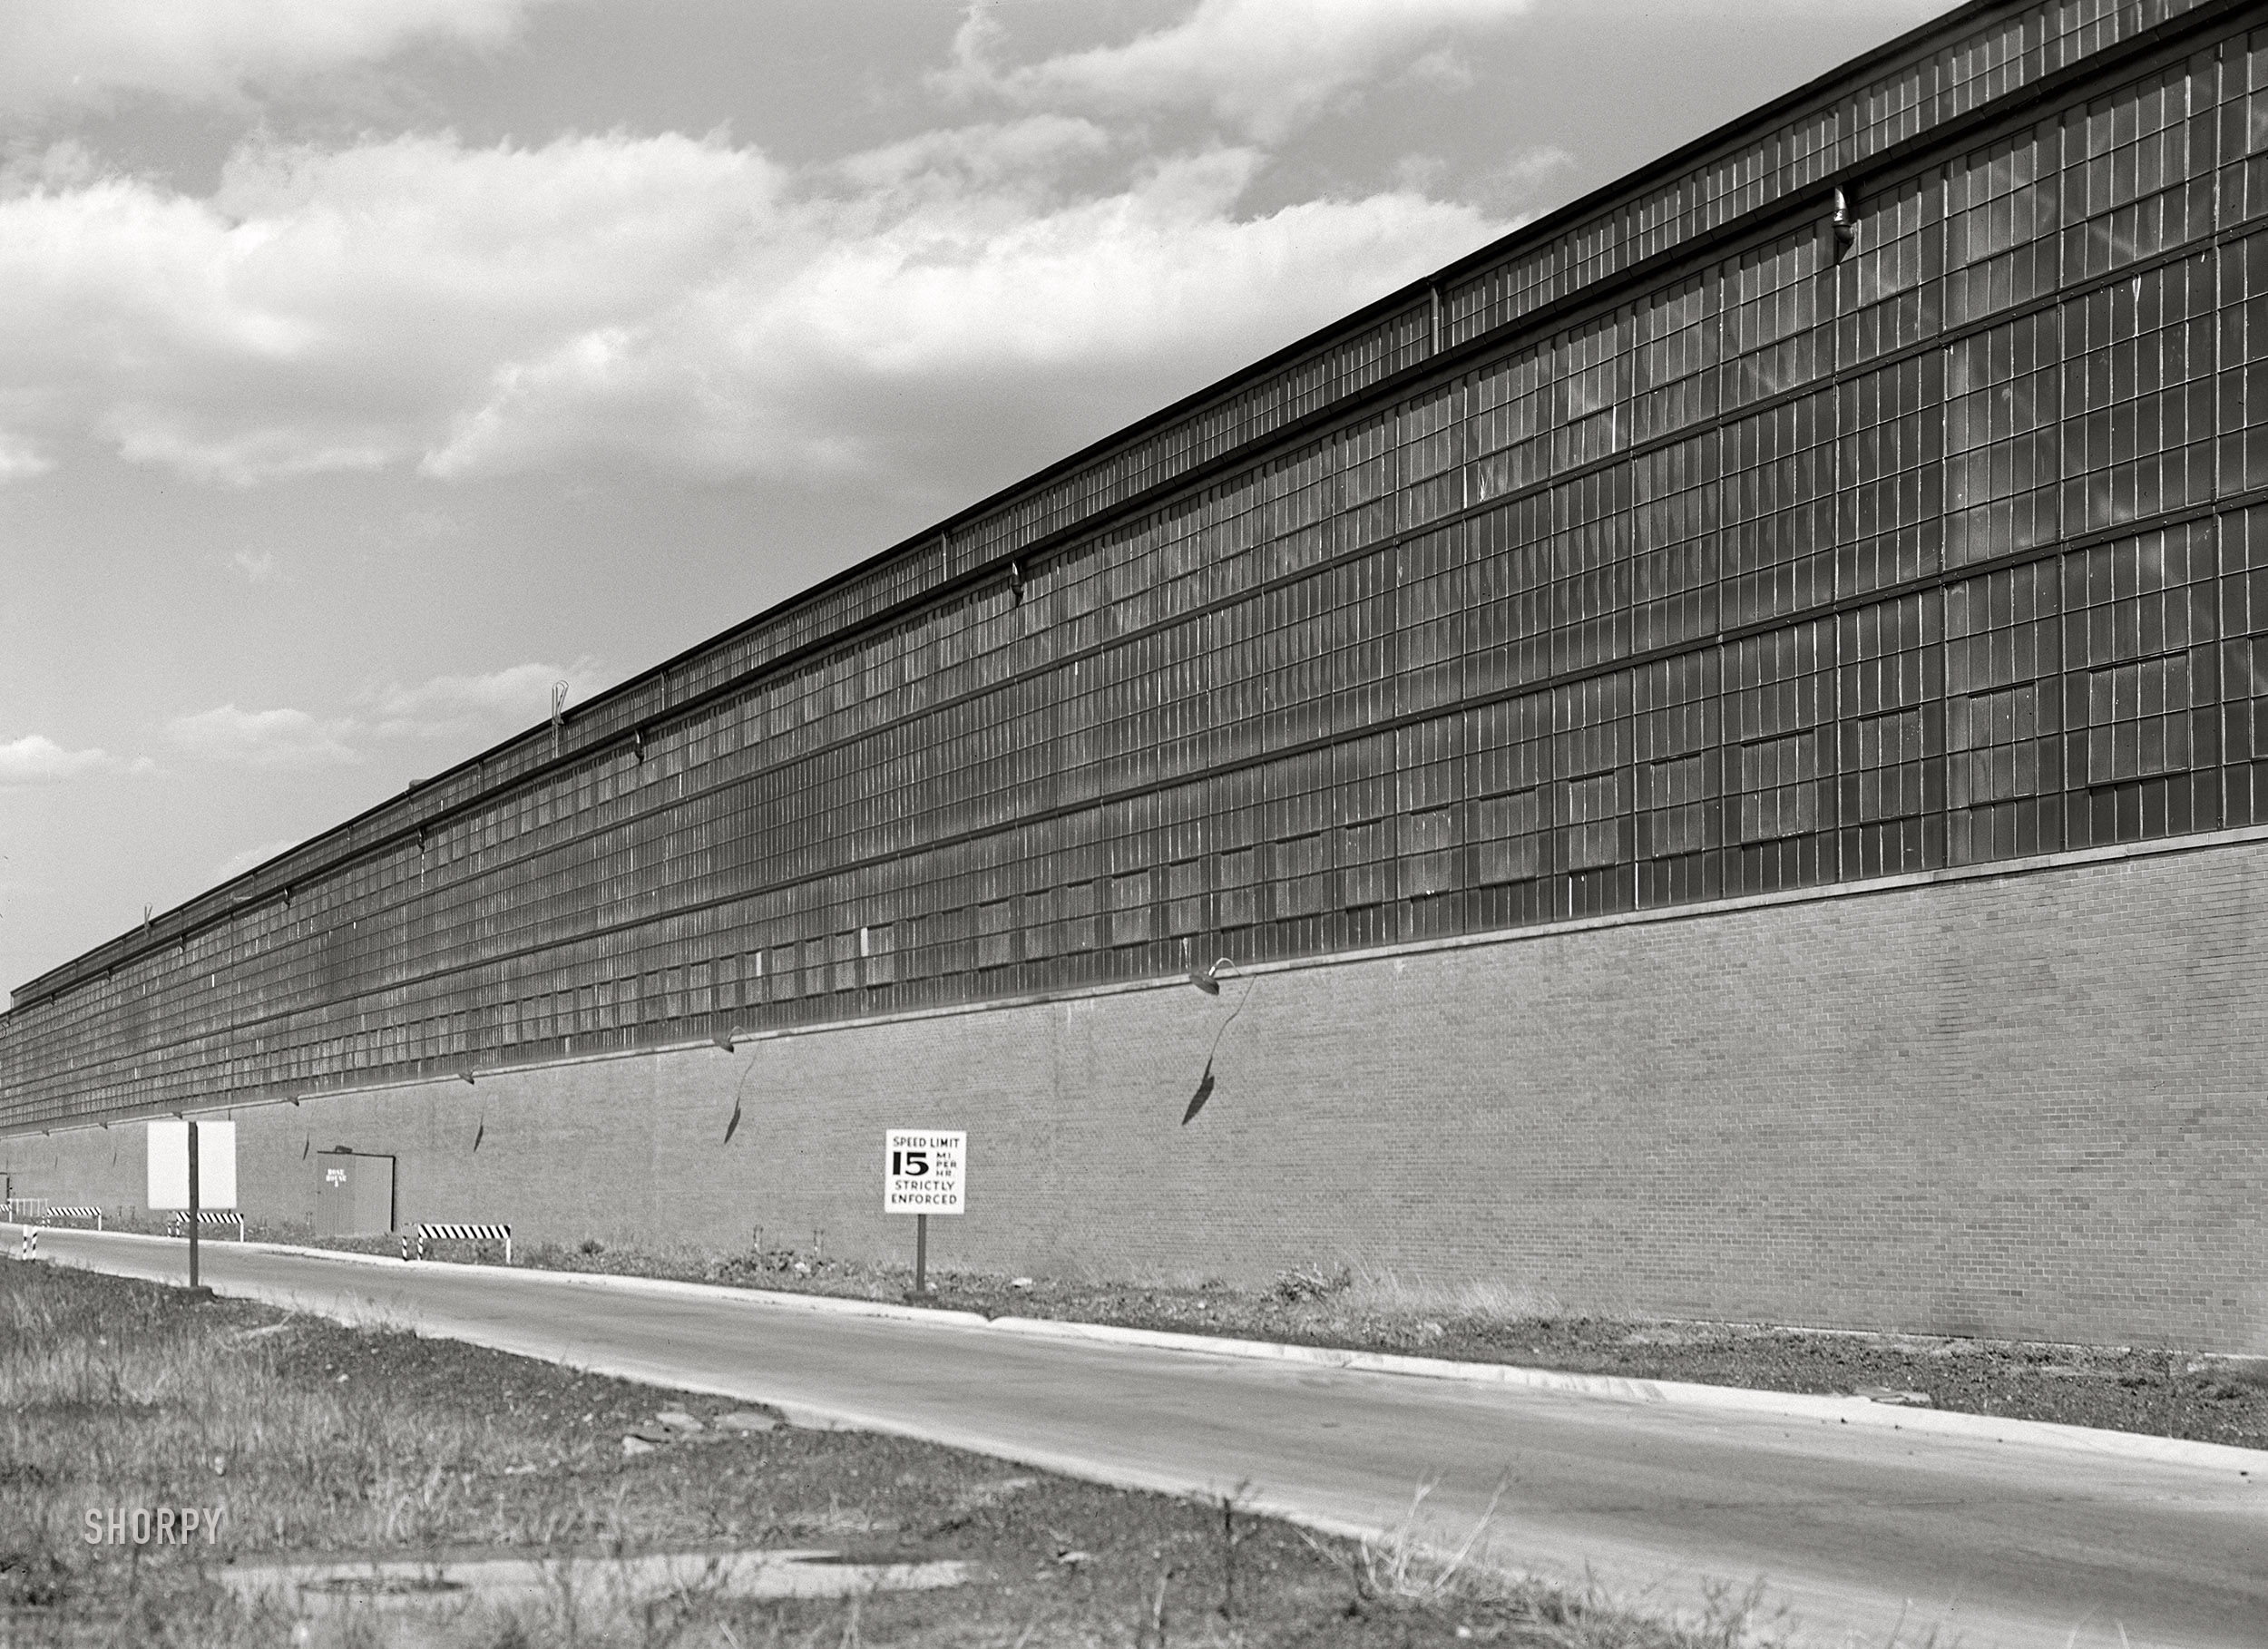 October 1941. "General Motors Fisher Body Ternstedt Division manufacturing plant. West Trenton, New Jersey." Medium format acetate negative by John Vachon. View full size.